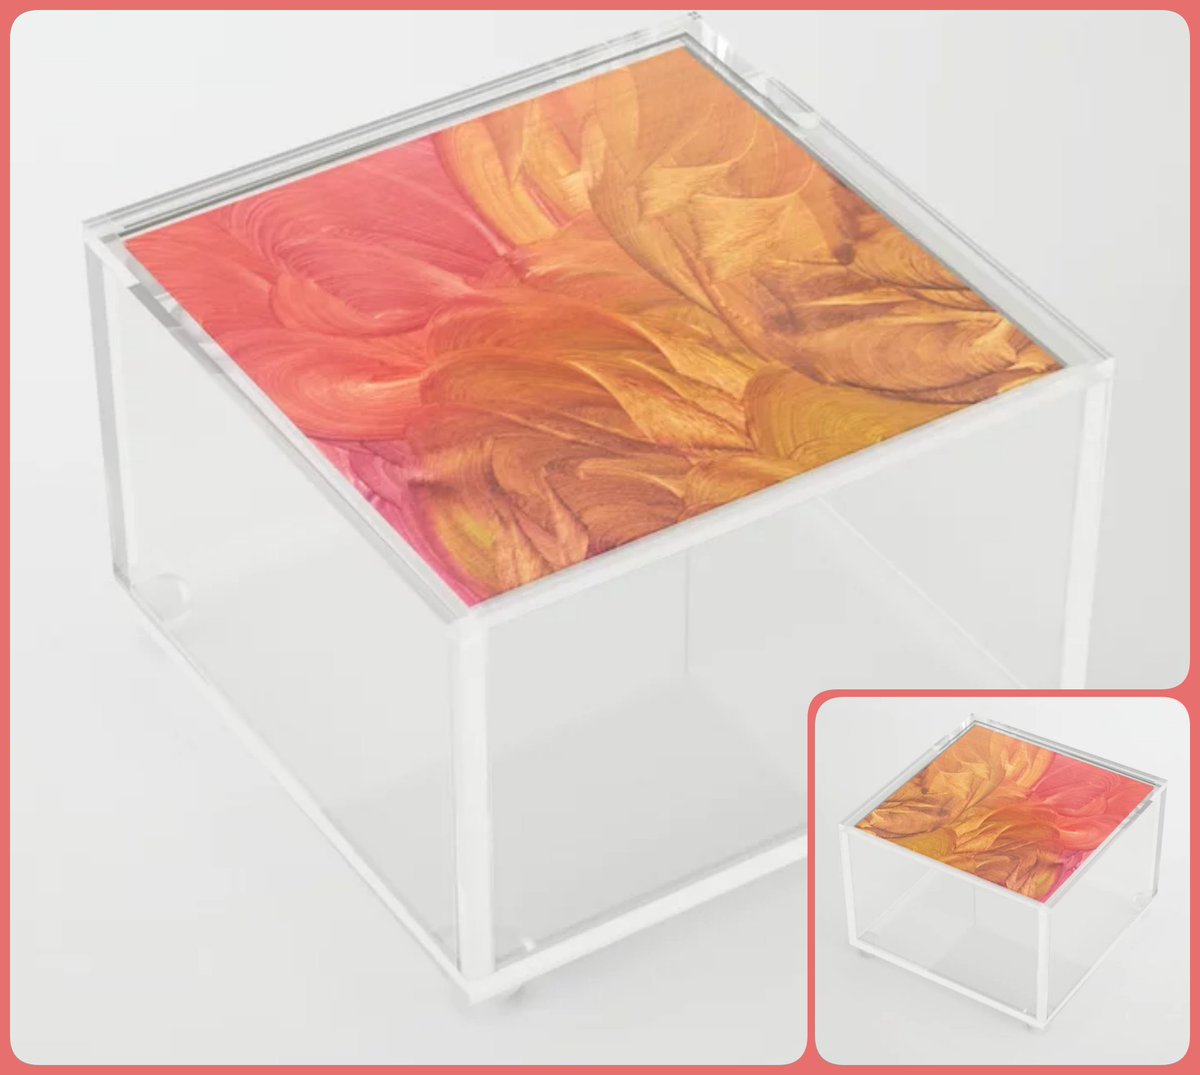 Heka Acrylic Box~Art Exquisite!~ #coasters #gifts #trays #mugs #coffee #society6 #artfalaxy #stickers #stationary #art #accents #modern #trendy #wine #water #placemats #desk #office #puzzles #tablecloths #runners #pink #golden #orange #peach

society6.com/product/heka14…